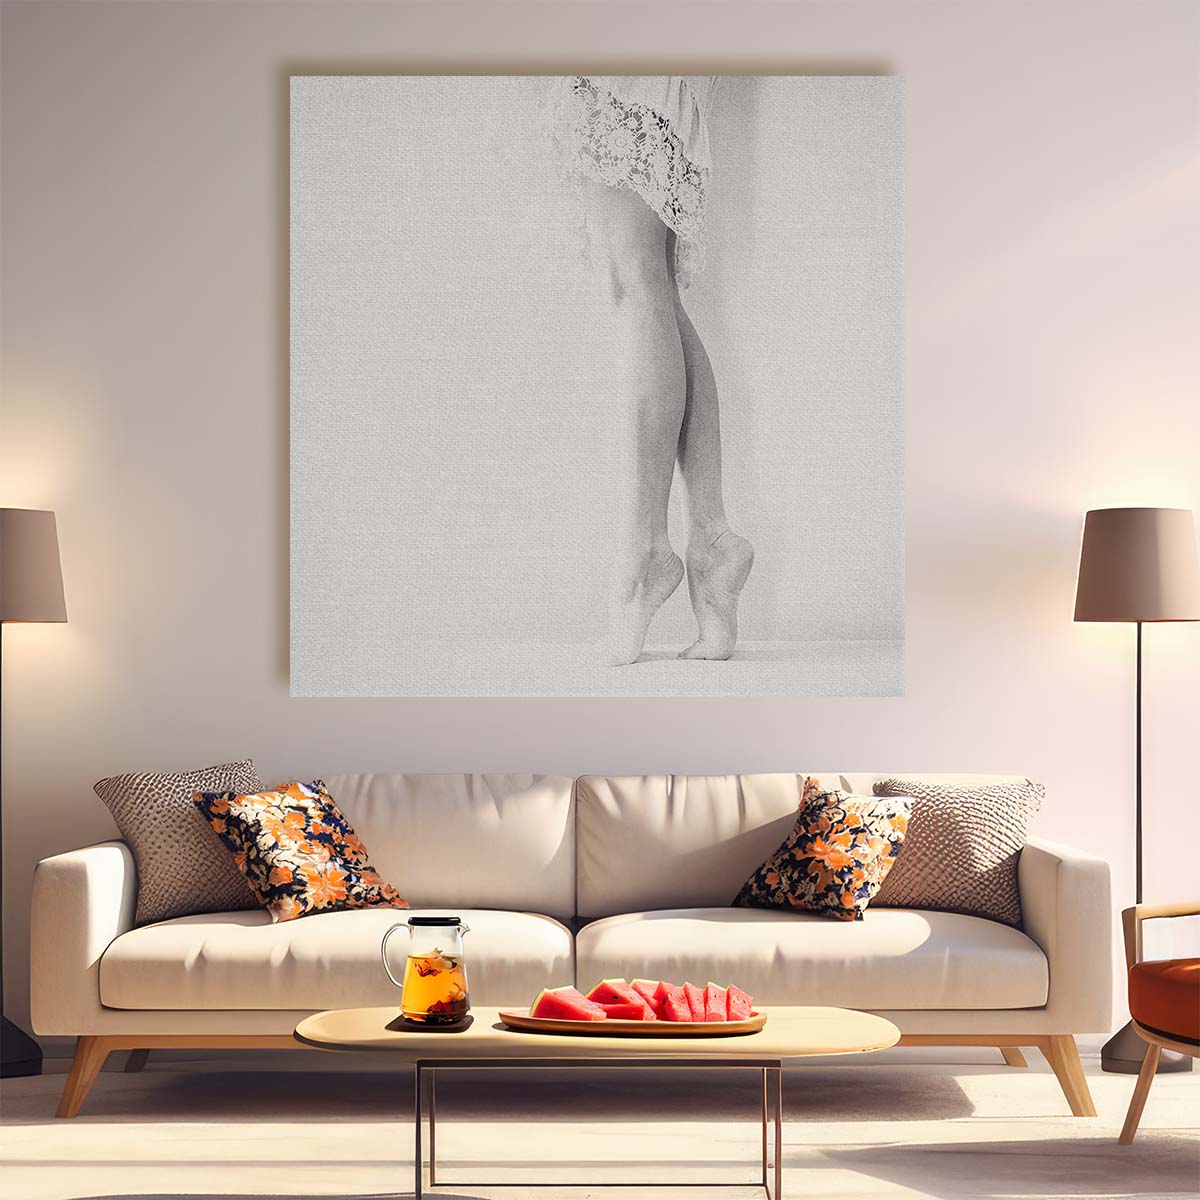 Delicate Monochrome Portrait of a Ballerina in Lace, Netherlands Wall Art by Luxuriance Designs. Made in USA.